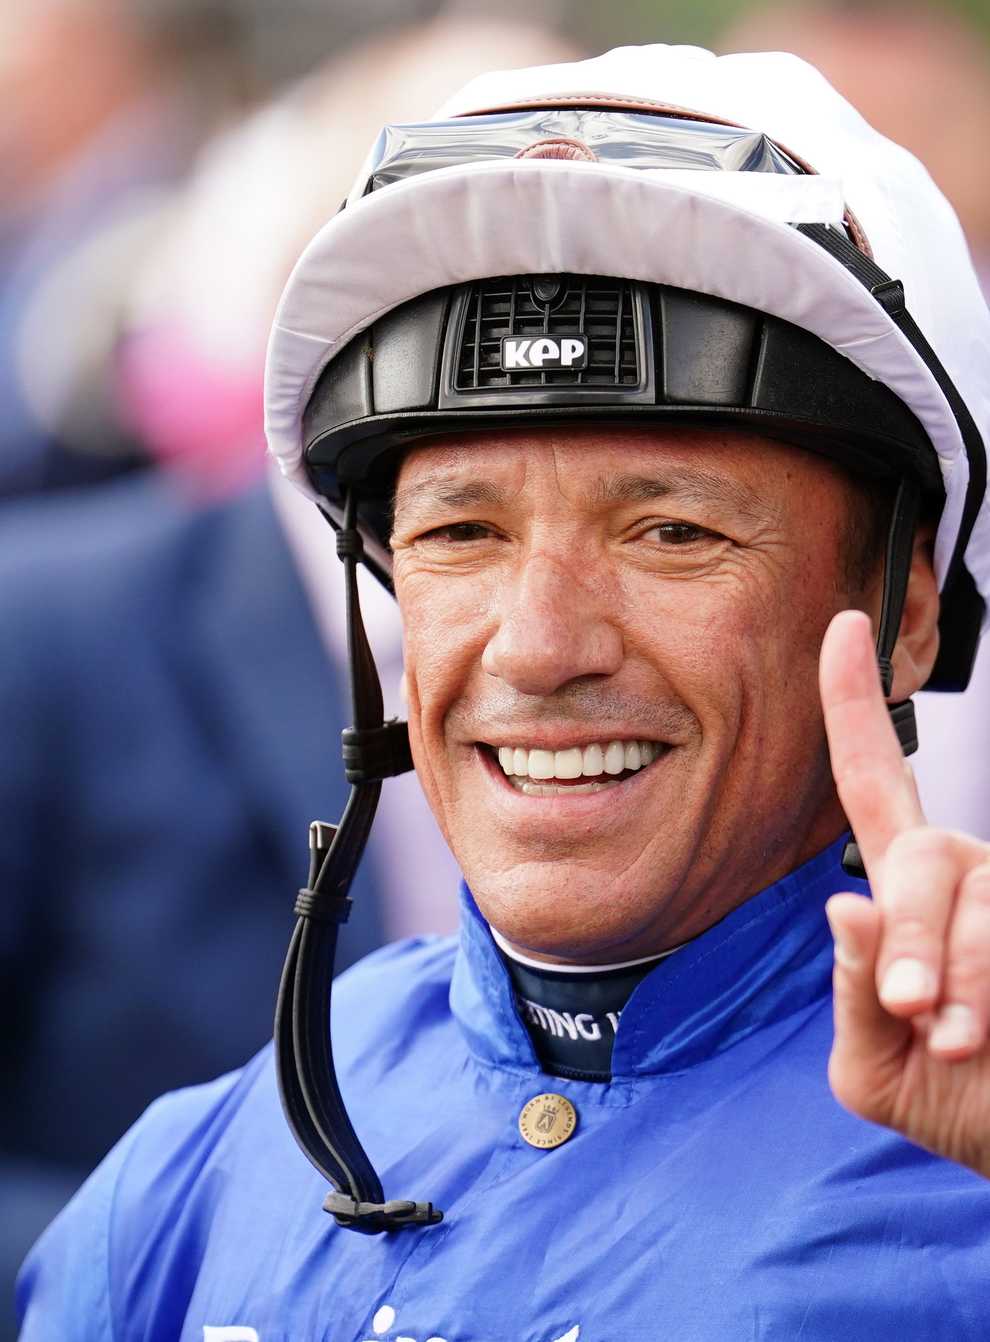 Frankie Dettori will need to be at his best on Sunday (Mike Egerton/PA)